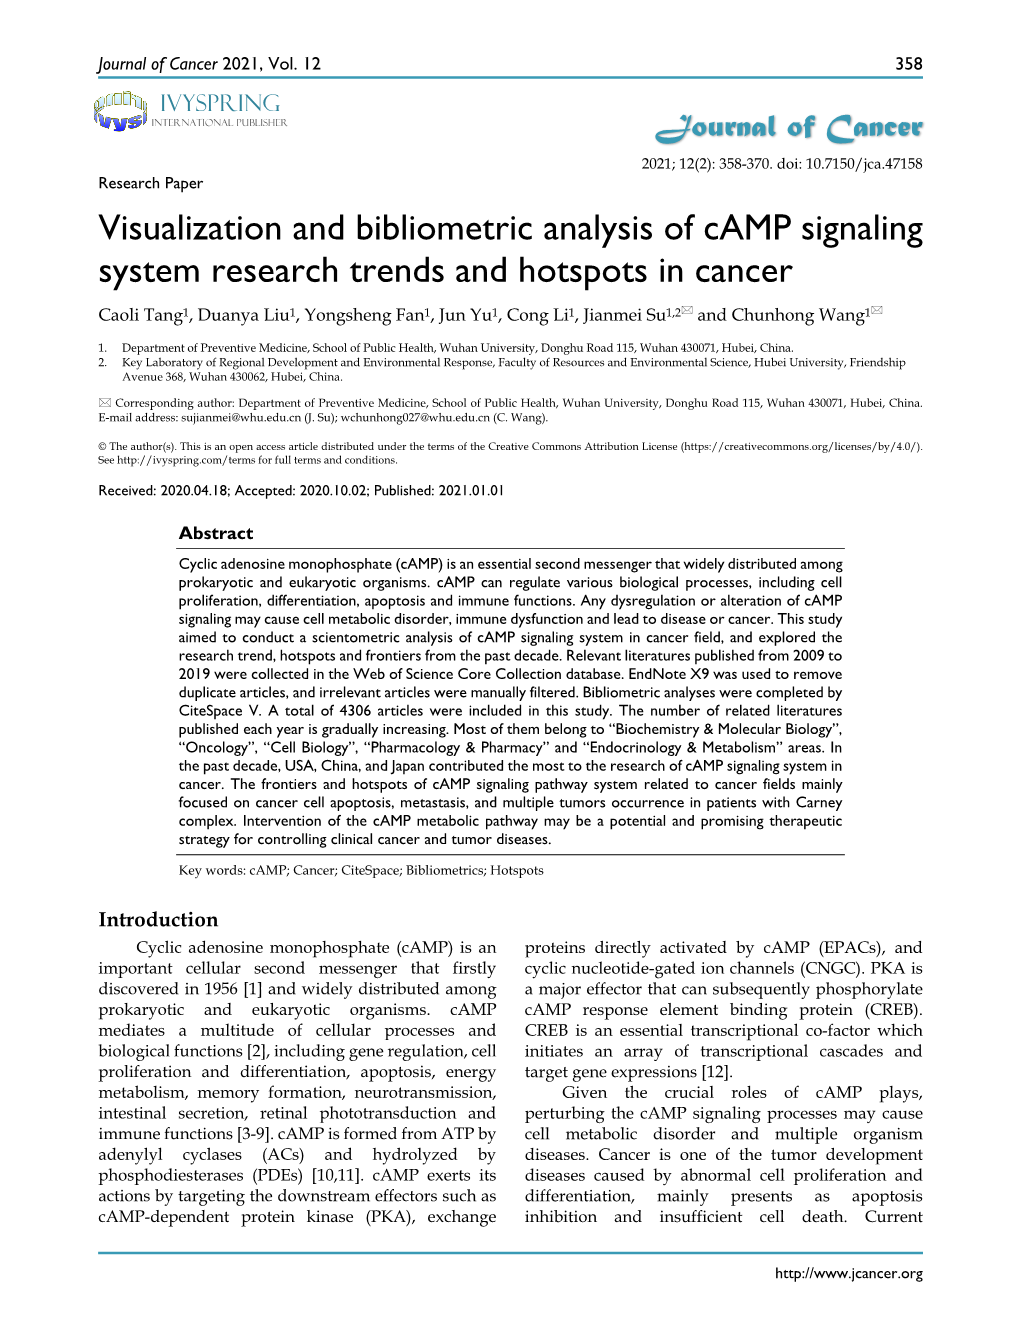 Visualization and Bibliometric Analysis of Camp Signaling System Research